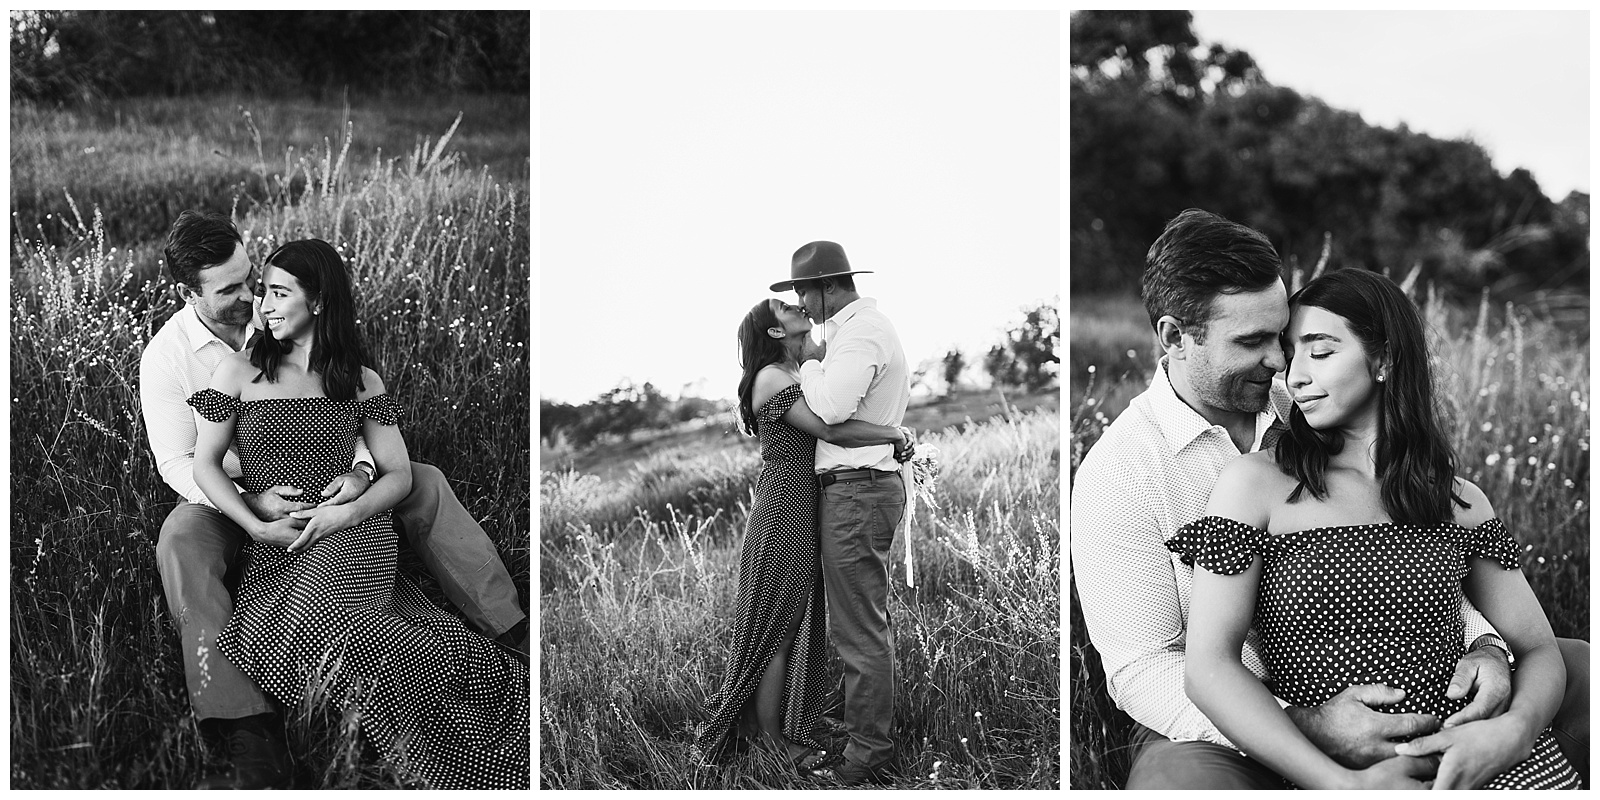 three black and white images of a couple in a wildflower field